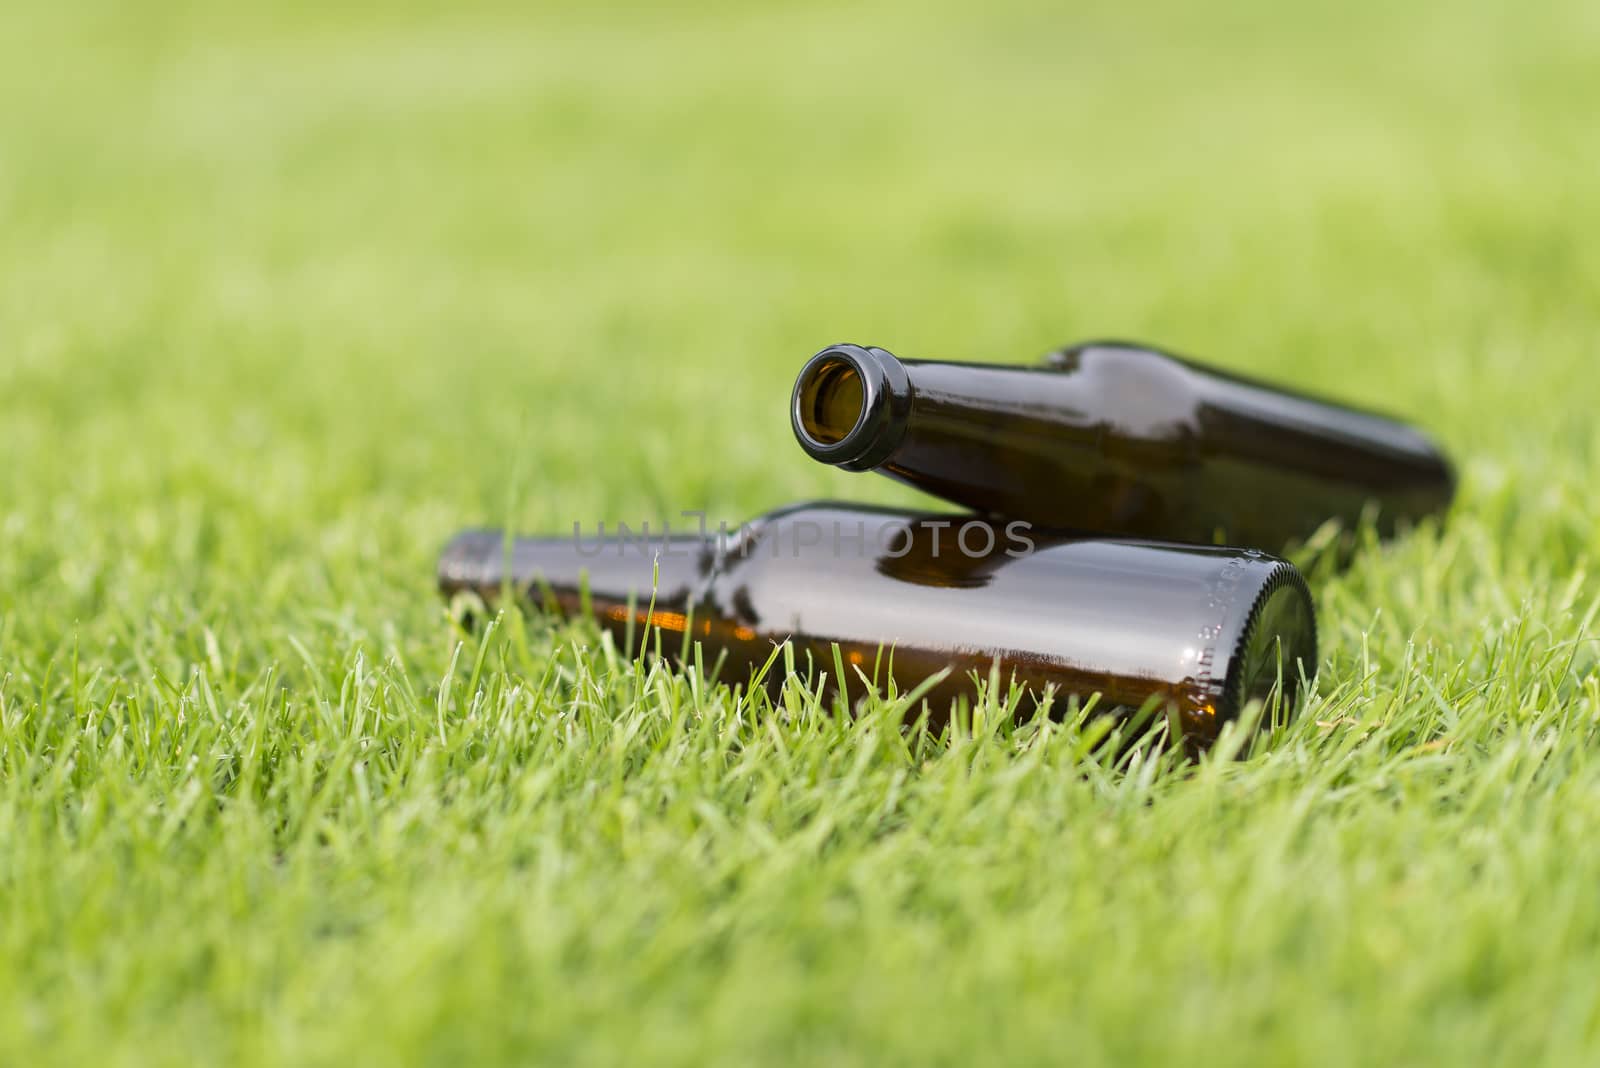 Empty beer bottles in a grass field with a vague background
